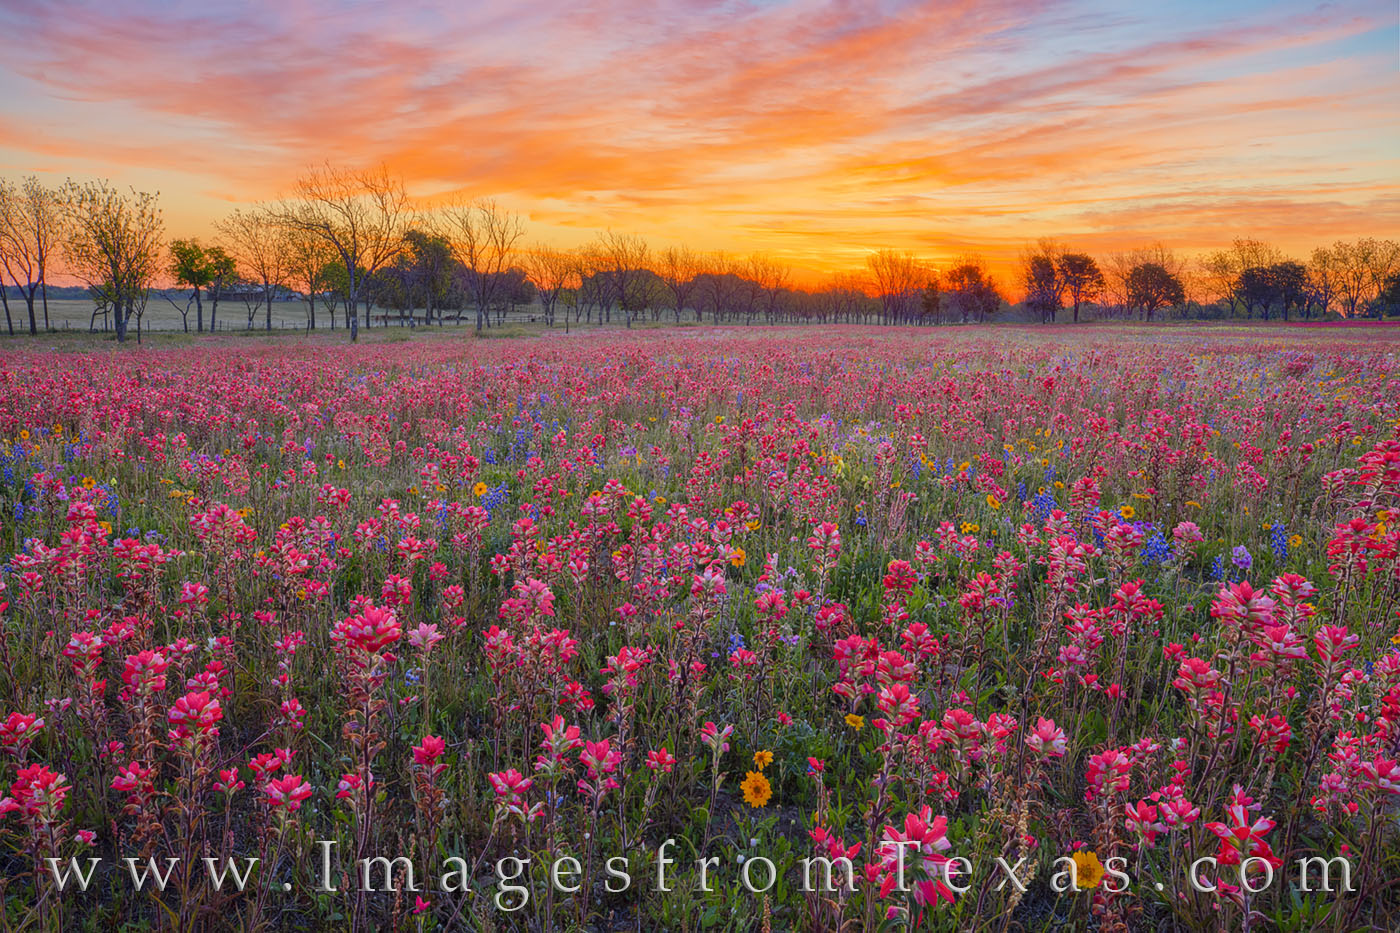 Indian Paintbrush painted this wildflower field red in the minutes before sunrise on a very cold April morning. Overhead, the...